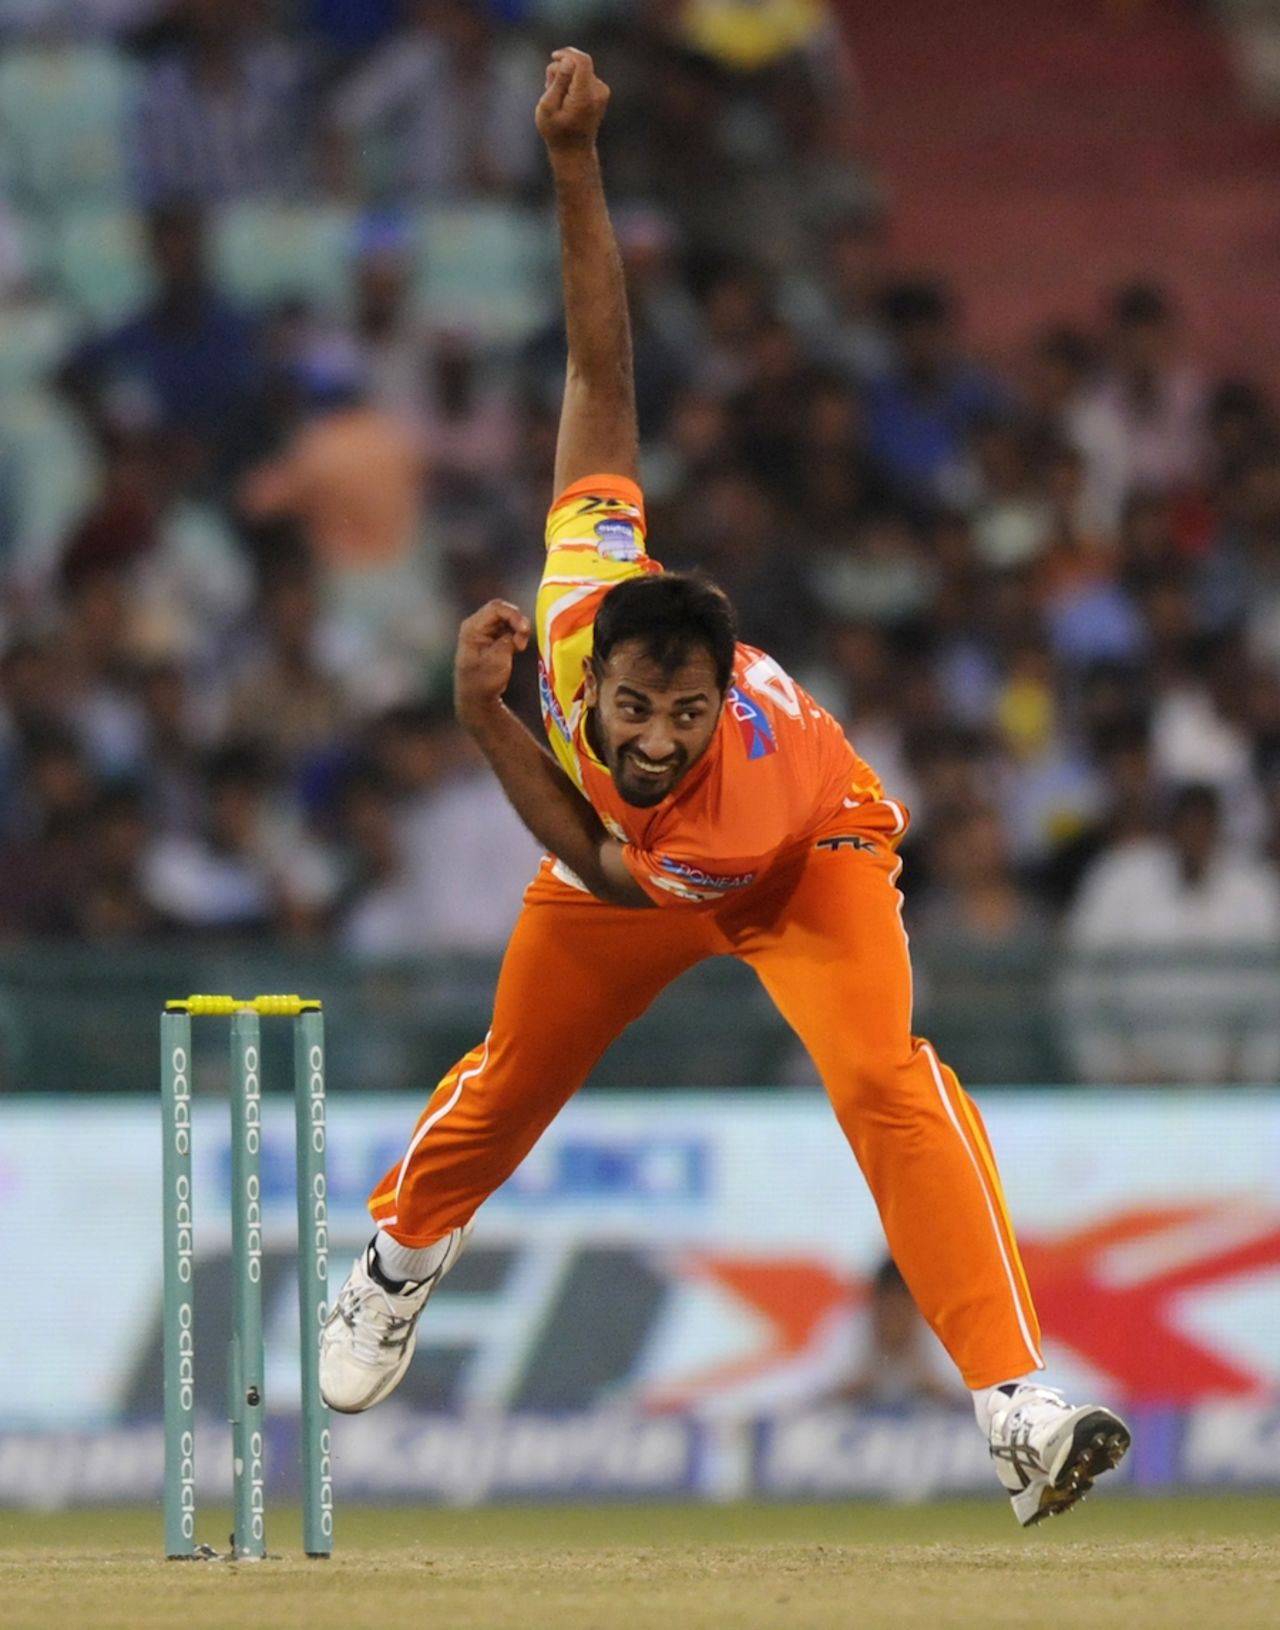 Wahab Riaz was economical in his four overs, Southern Express v Lahore Lions, CLT20 qualifier, Raipur, September 16, 2014